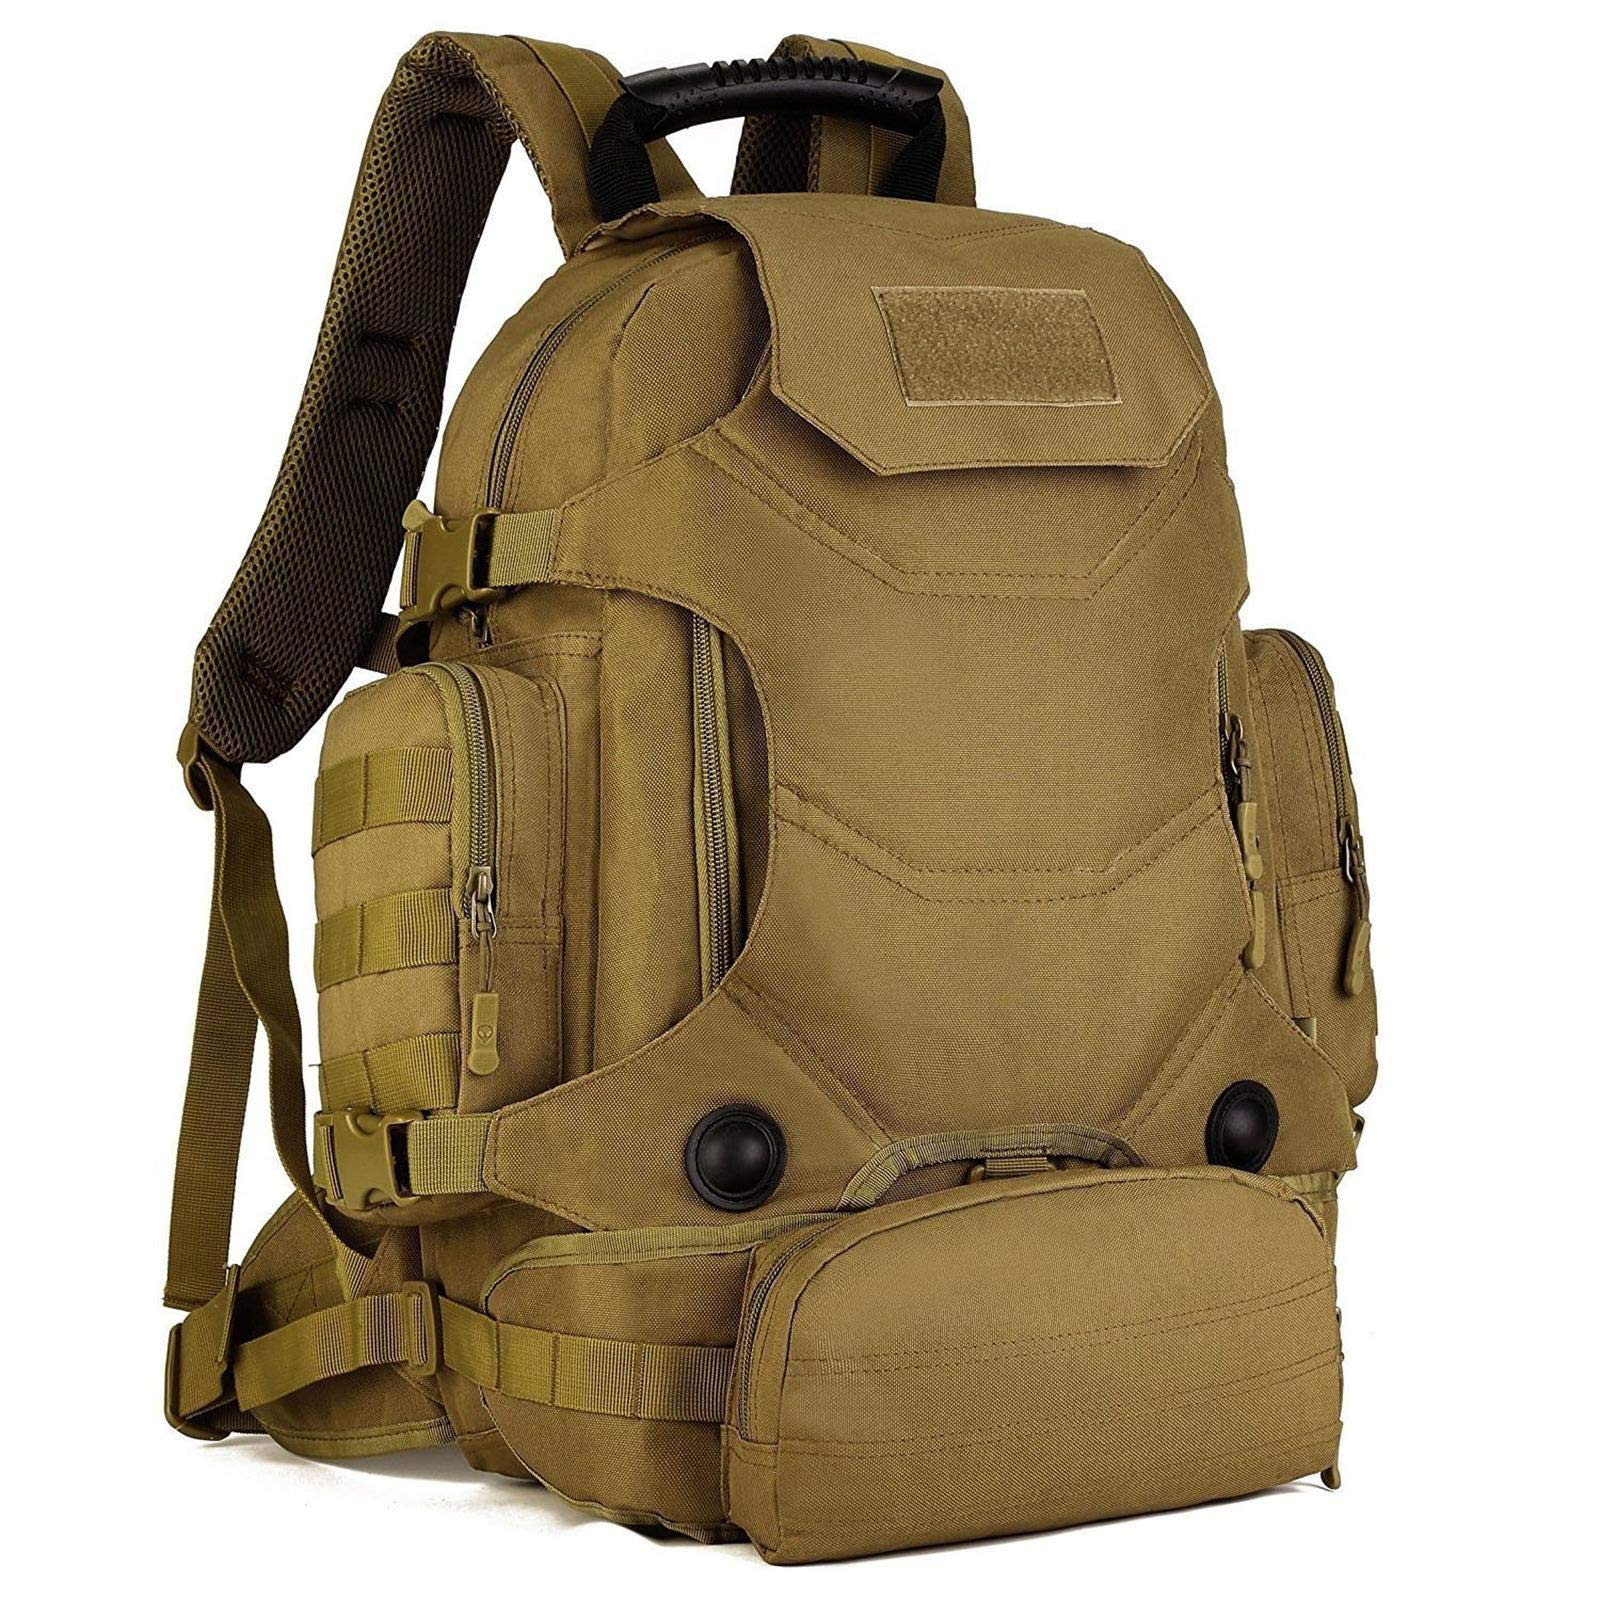 Selighting Tactical Backpack 40L Military Rucksack Waterproof MOLLE Assault Pack Hiking Backpacks with a Waist Bag for Trekking Travelling Hiking Camping